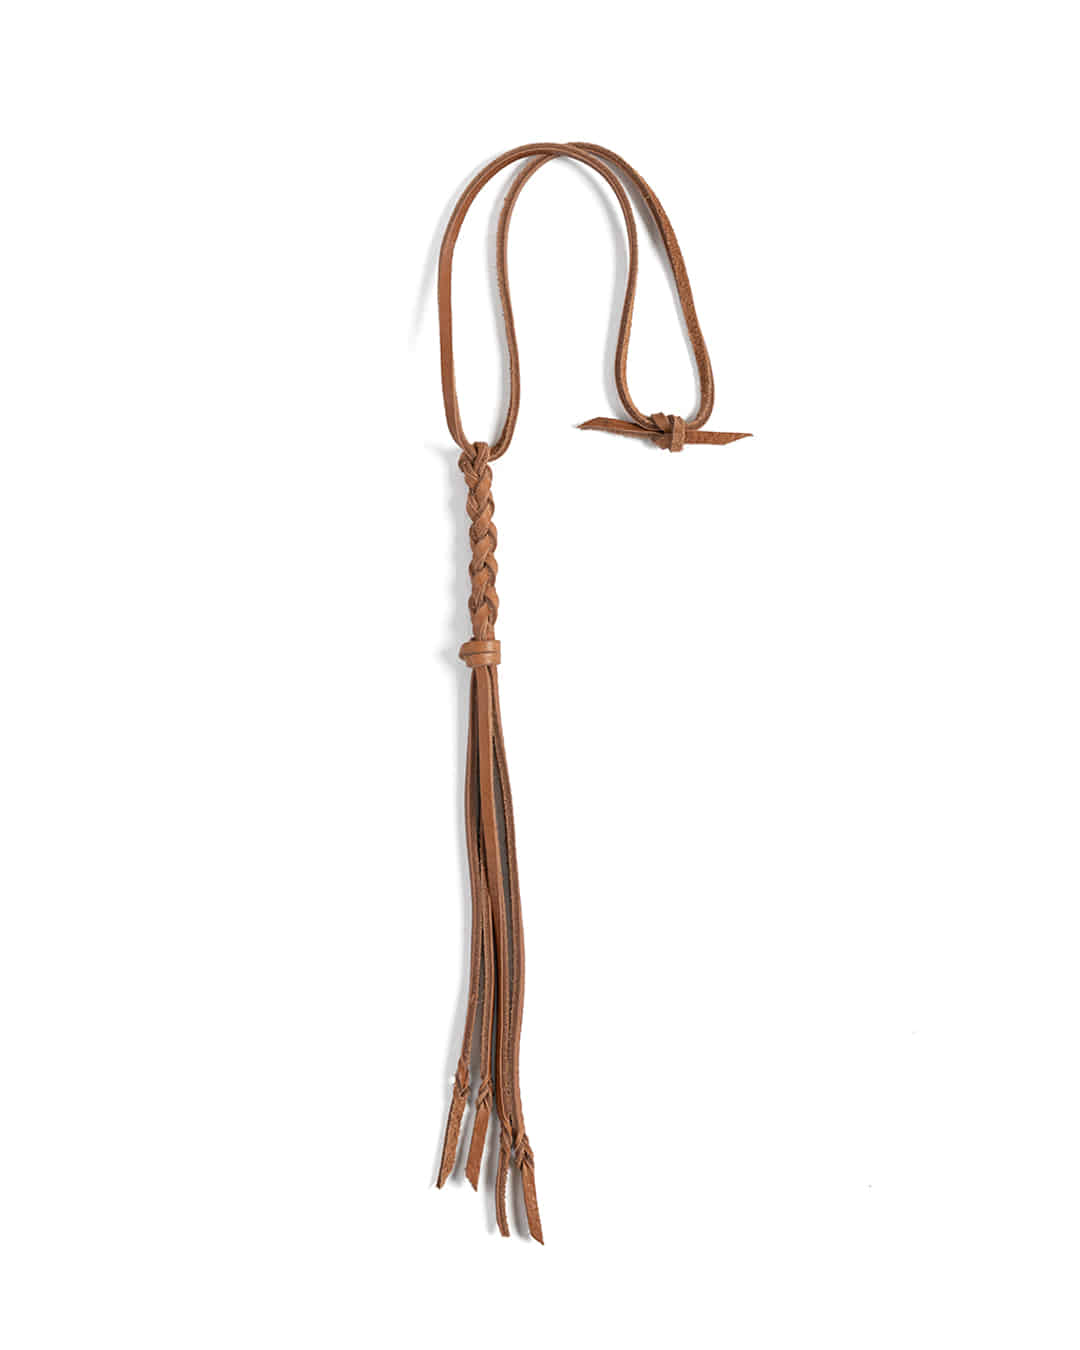 BLN-11 BRAIDED LEATHER NECKLACE (brown)